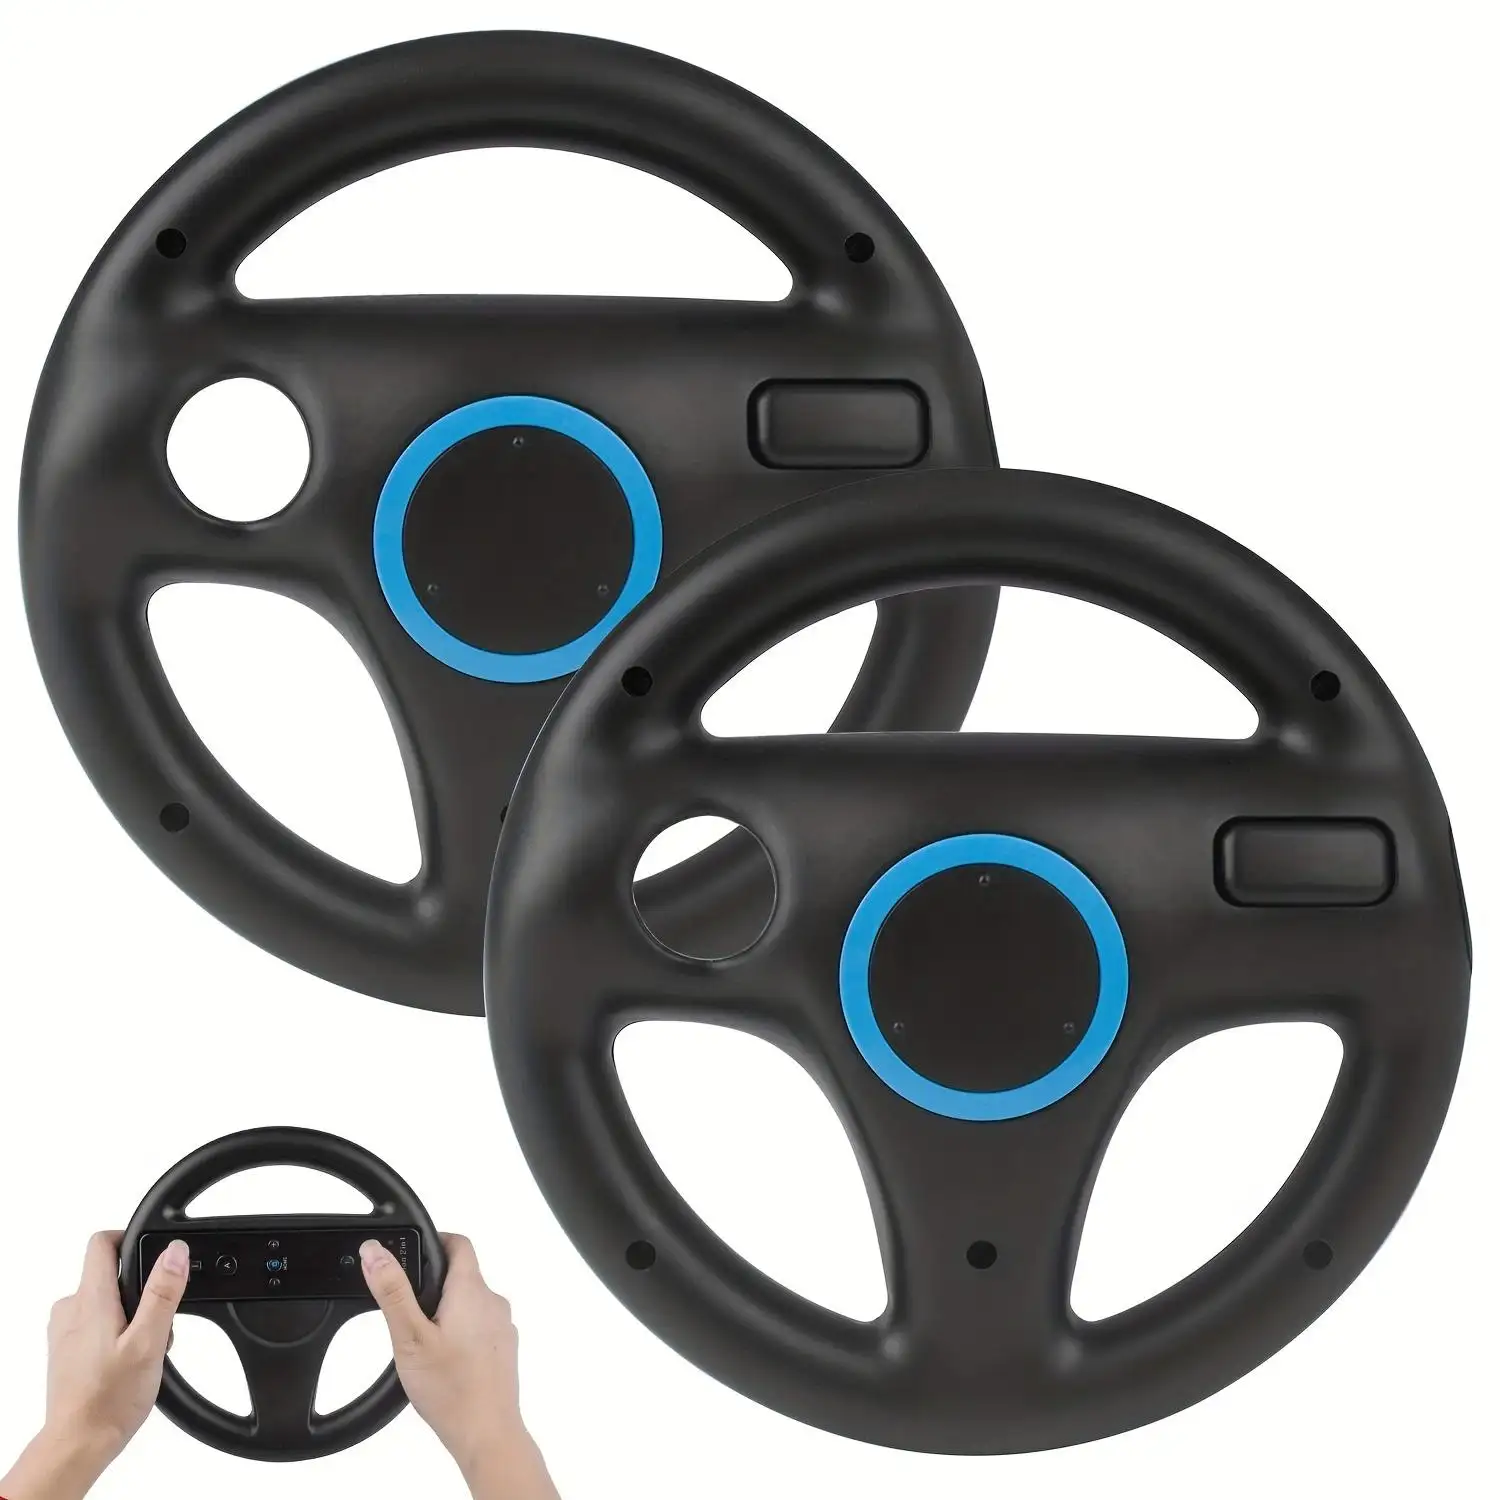 Work With Wii Remotes Wii Controllers Wii Racing Wheels, Black